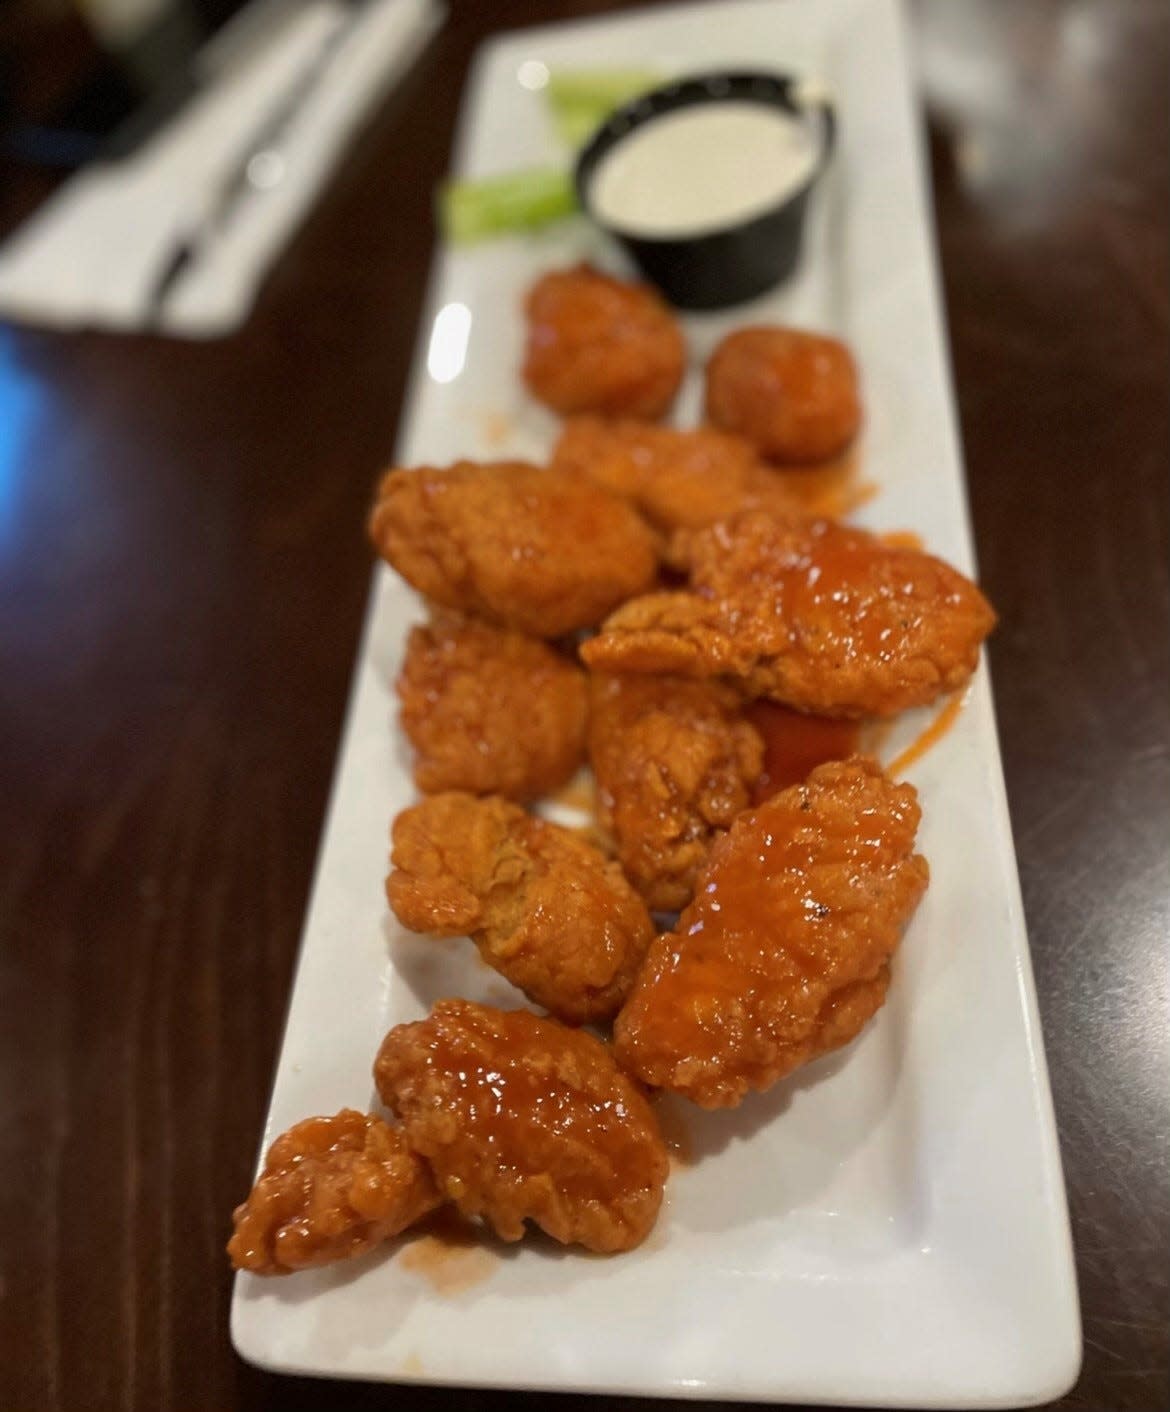 Allendale Bar & Grill in Allendale was voted as having the best (medium) buffalo style wings and the best boneless wings.